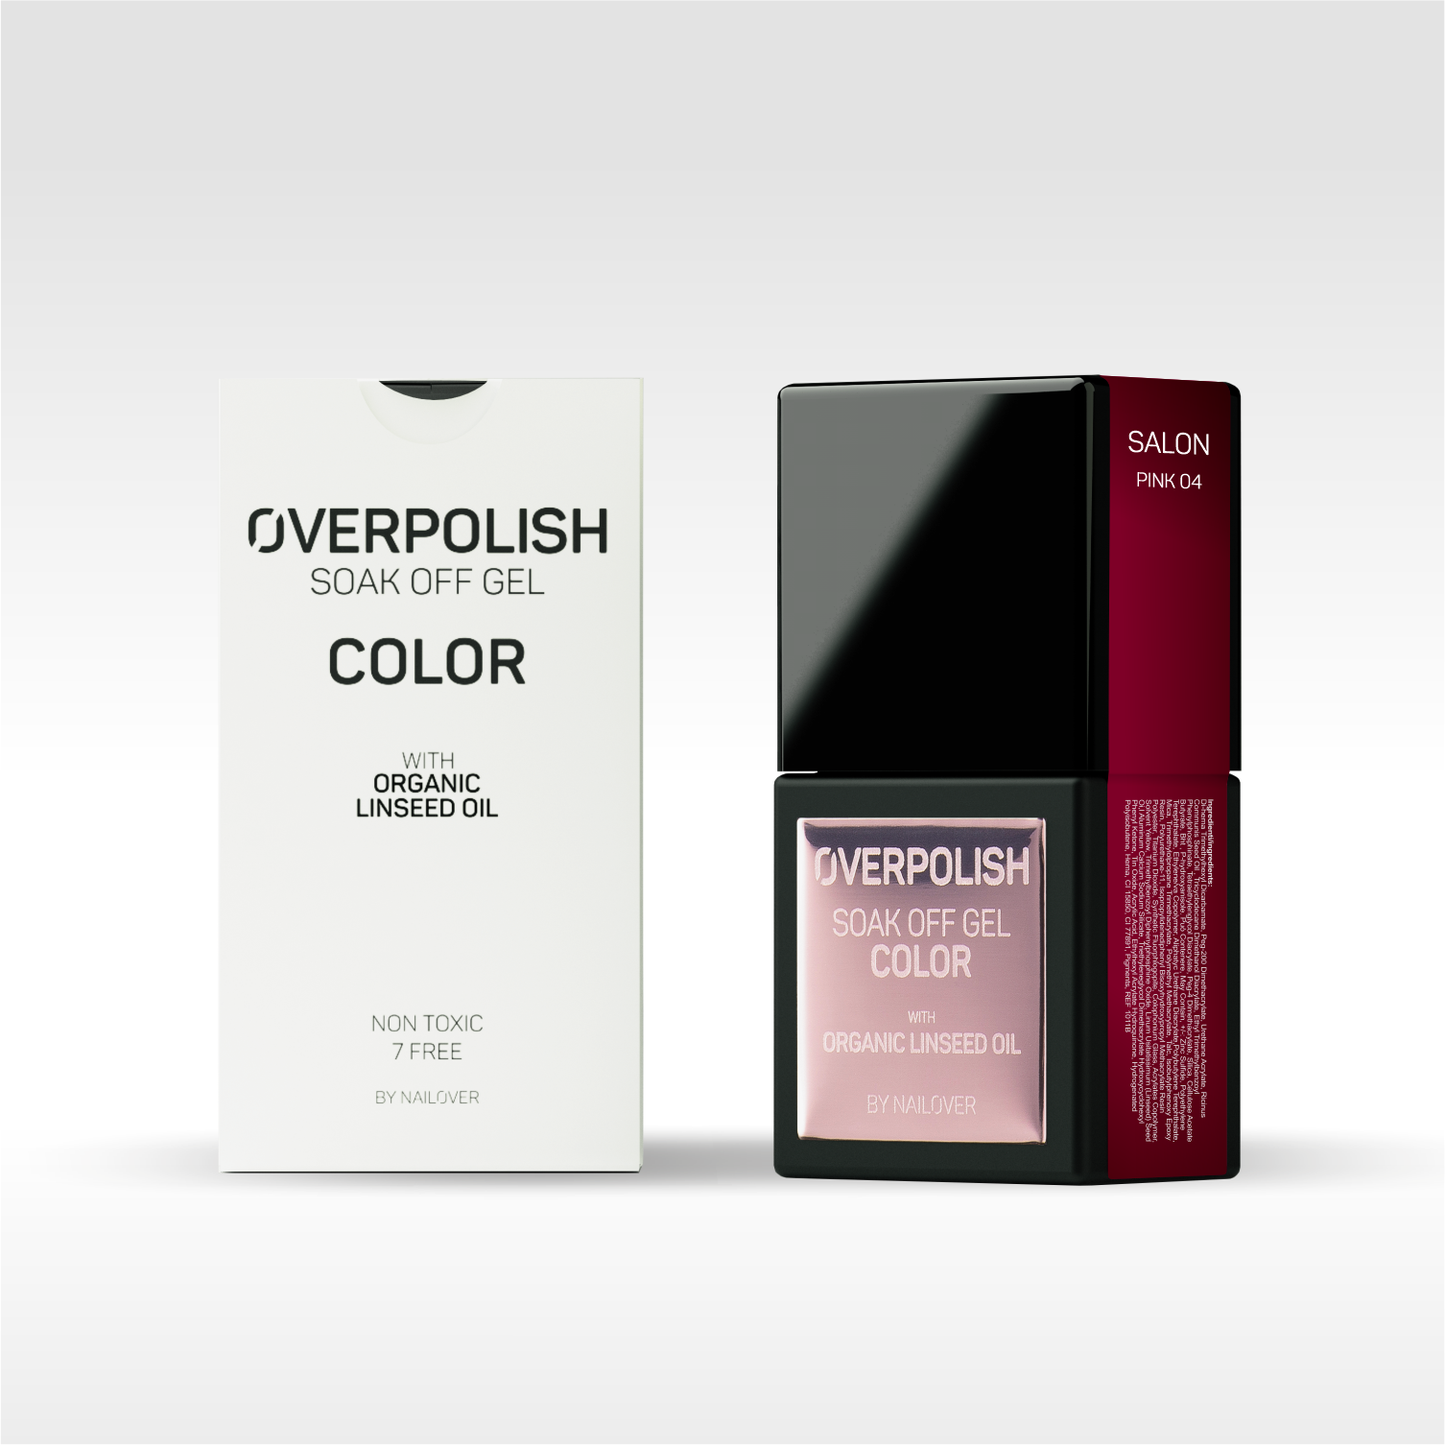 Overpolish Soak Off Gel Color - Pink Tones WITH ORGANIC LINSEED OIL